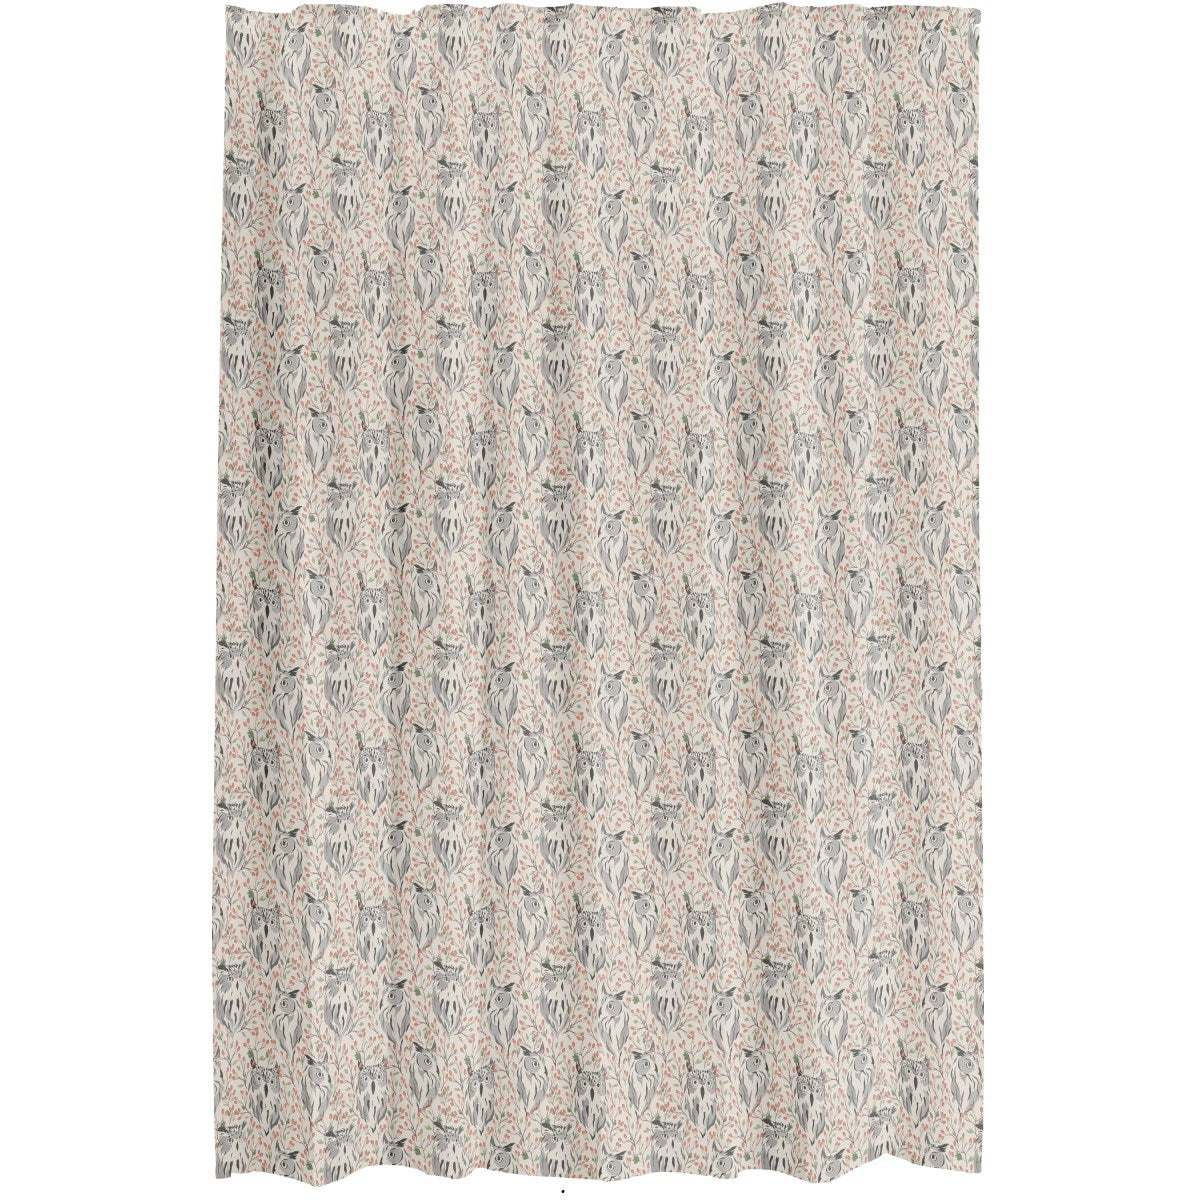 Perched Owl Shower Curtain